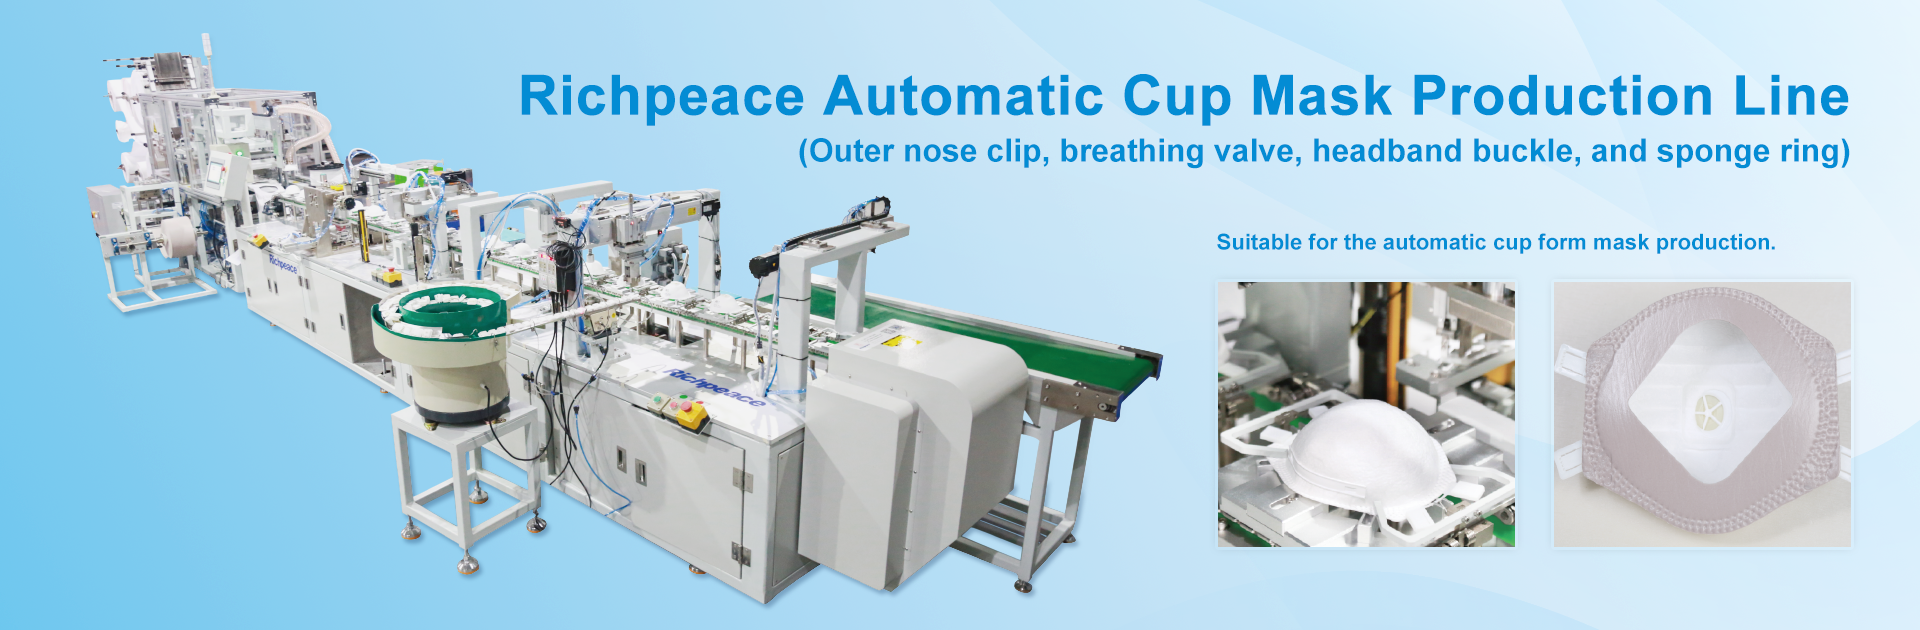 Cup Mask Production Line (Outer nose clip, breathing valve, headband buckle, and sponge ring)